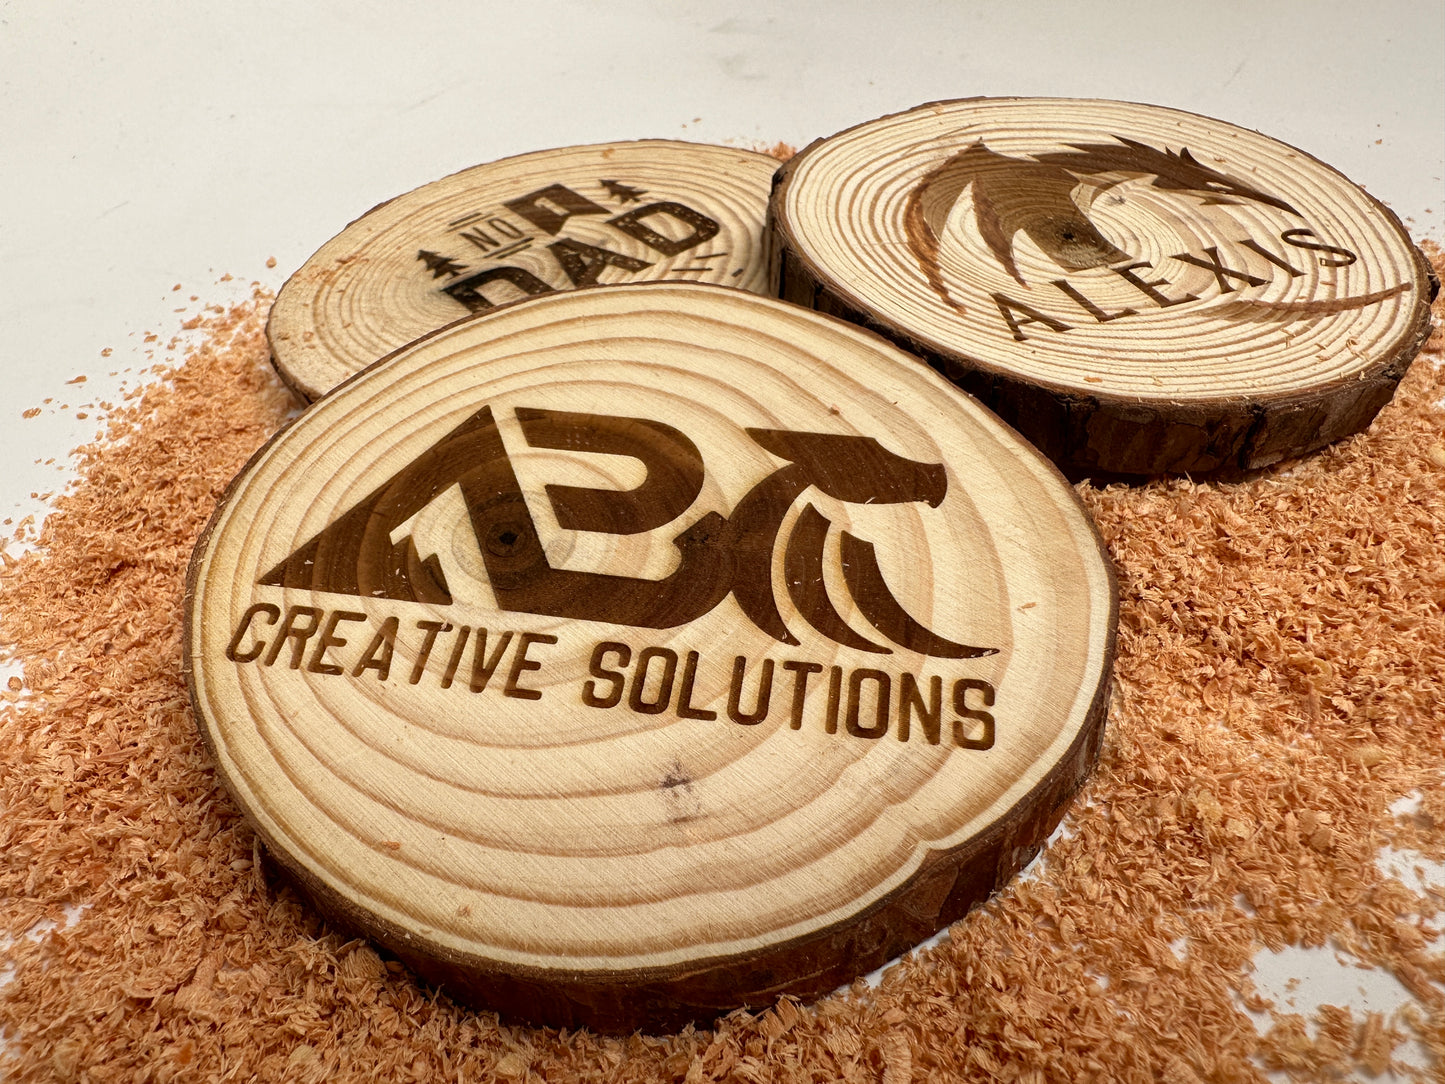 A close up view of three wooden coasters laser engraved with words or images on a pile of sawdust